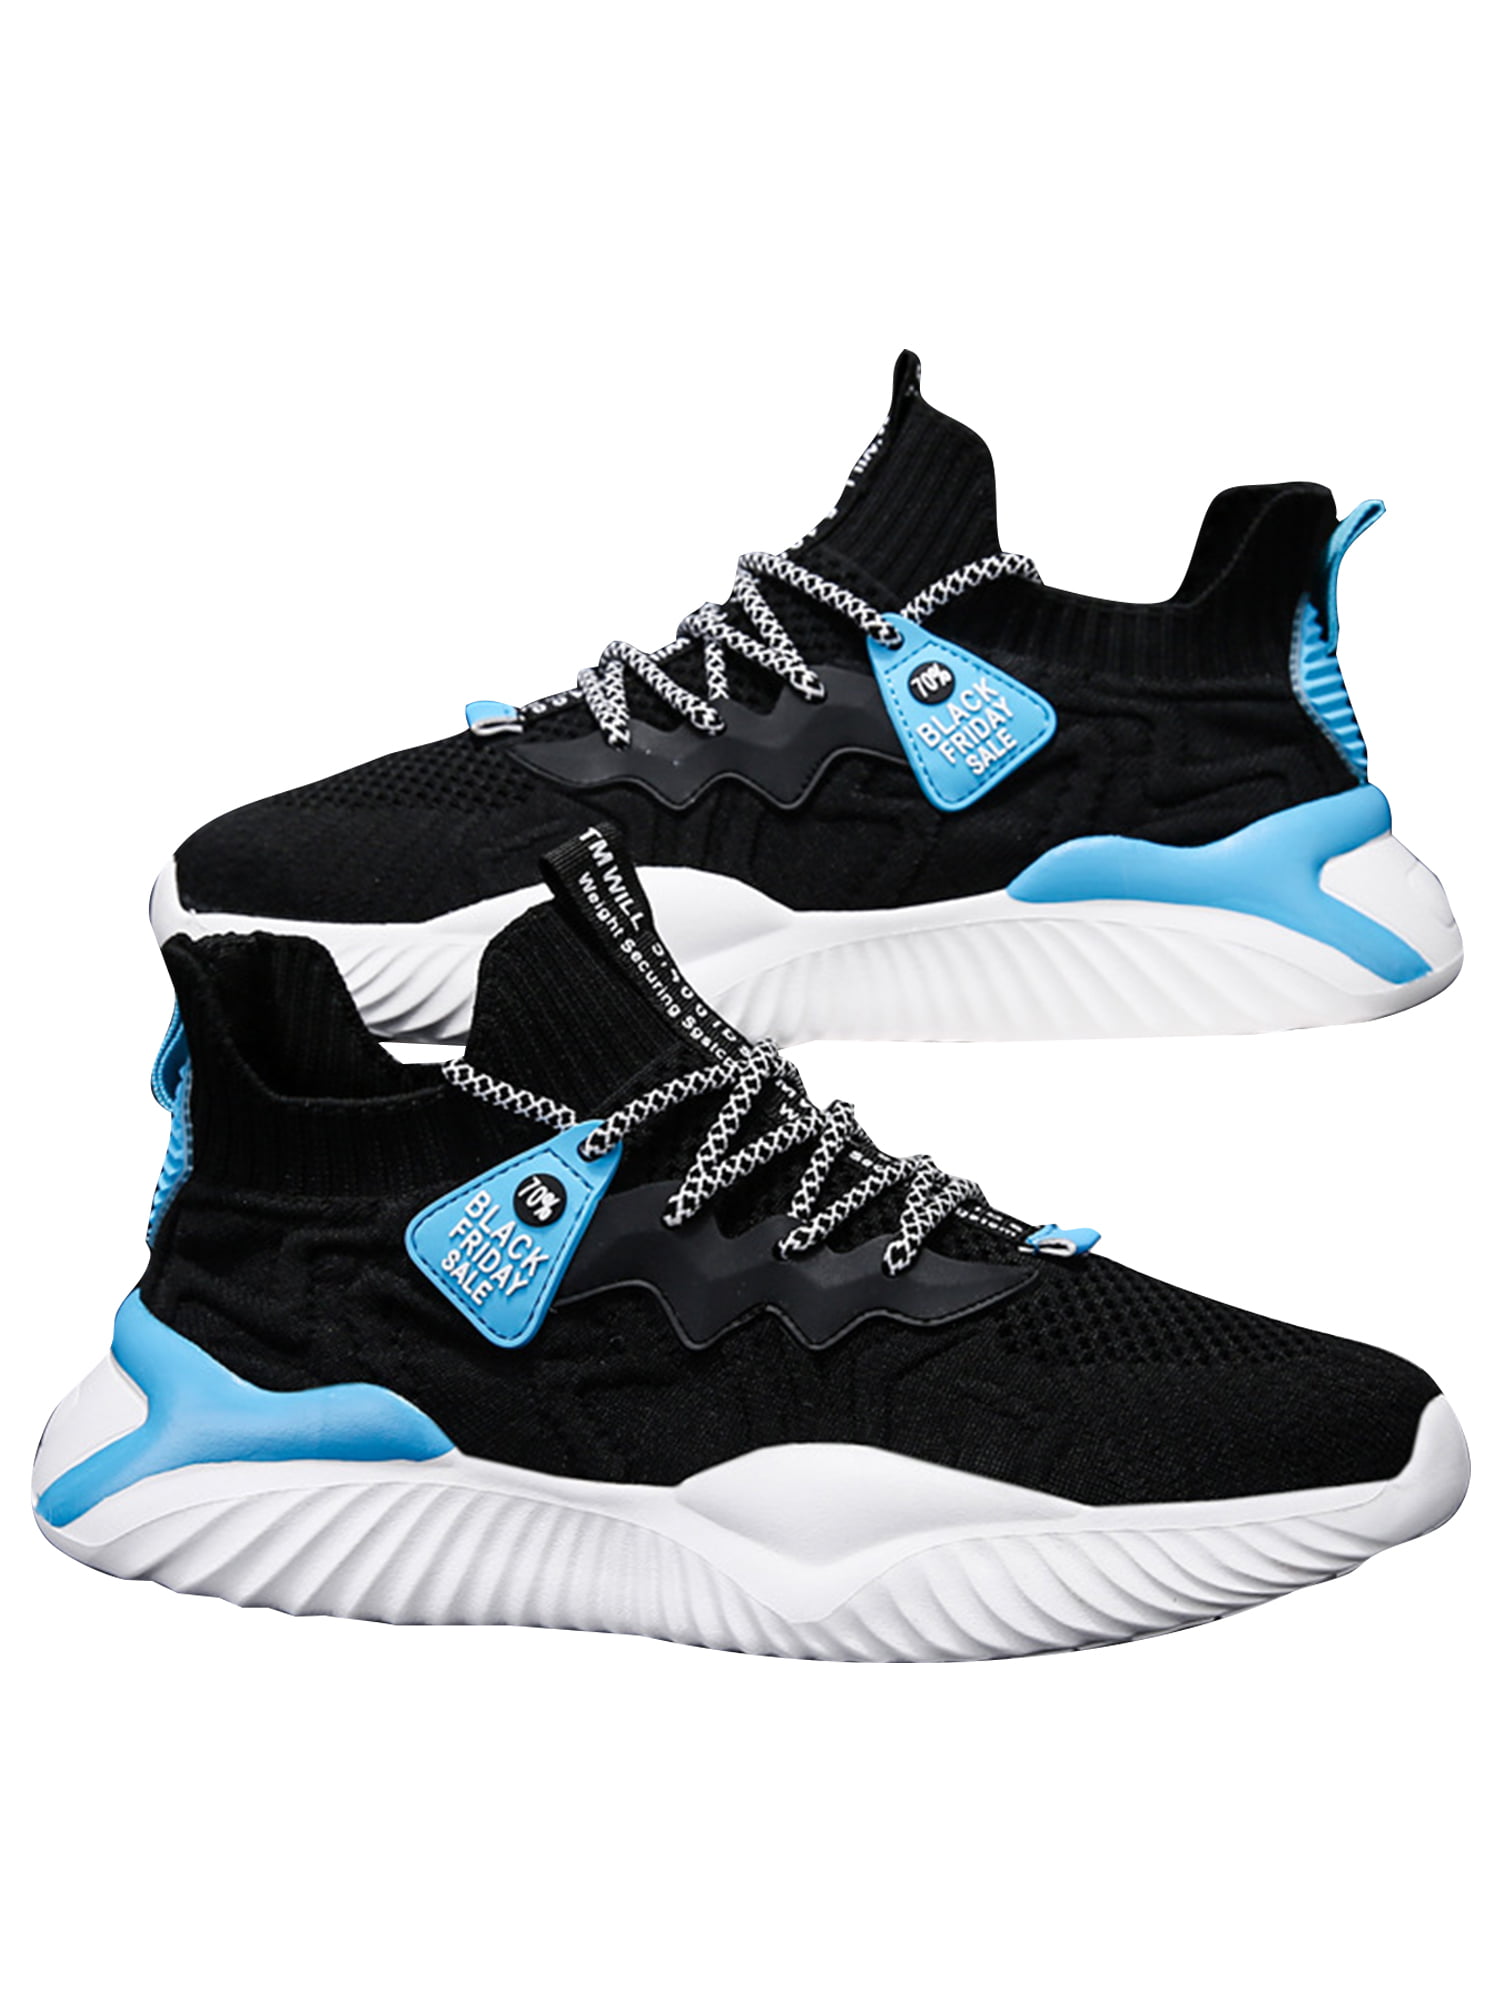 New Mens Running Athletic Shoes Casual Walking Gym Light Weight Sneakers 